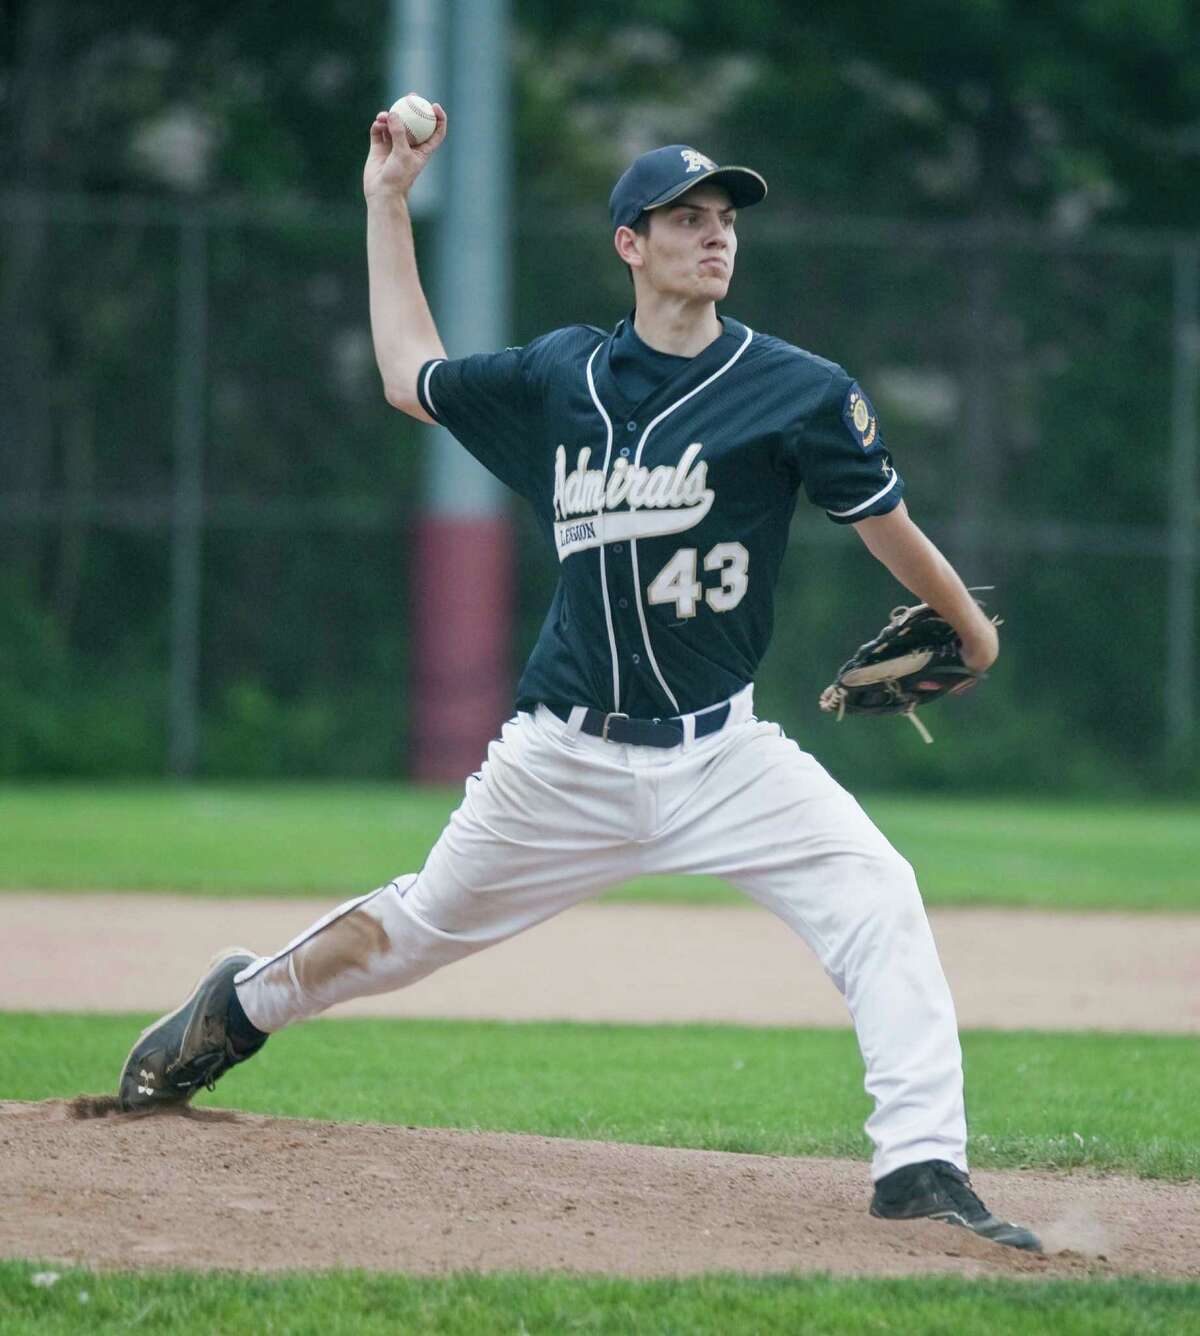 Bethel Admirals pitcher Tom Parker delivering the ball against New Milford in a Senior Legion Baseball game played at Bethel High School. Thursday, July 2, 2015